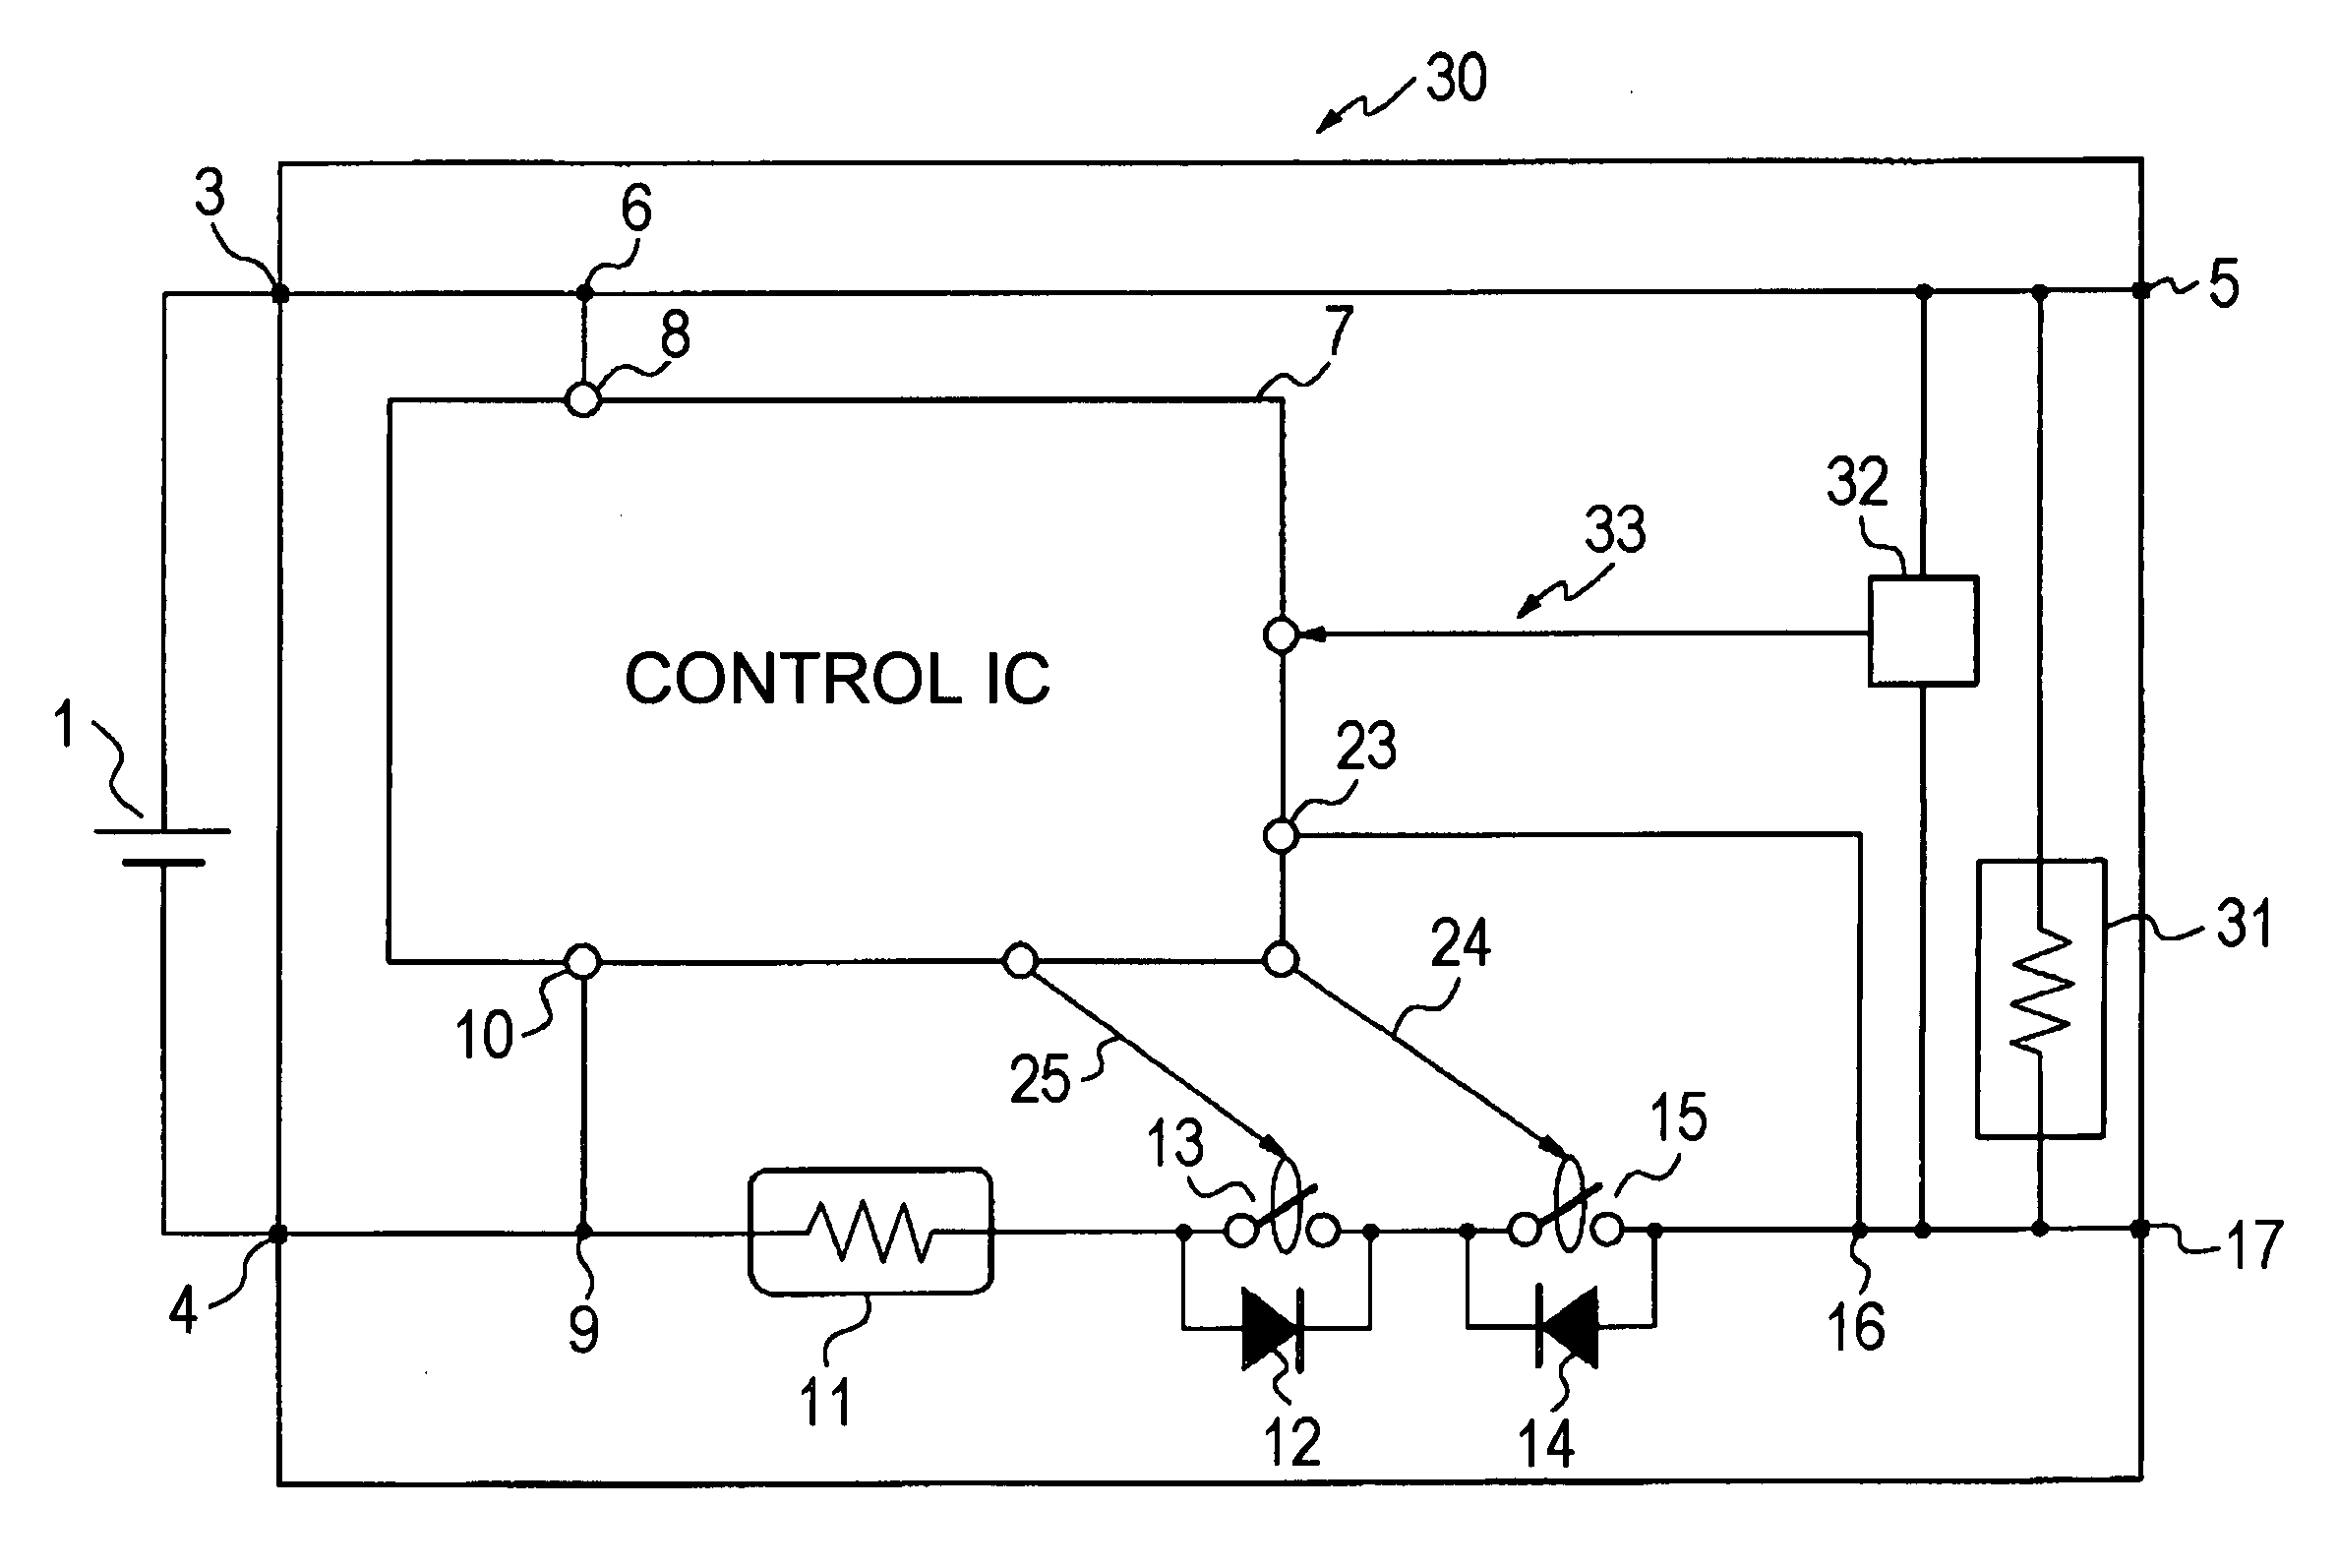 Battery pack having a protection circuit